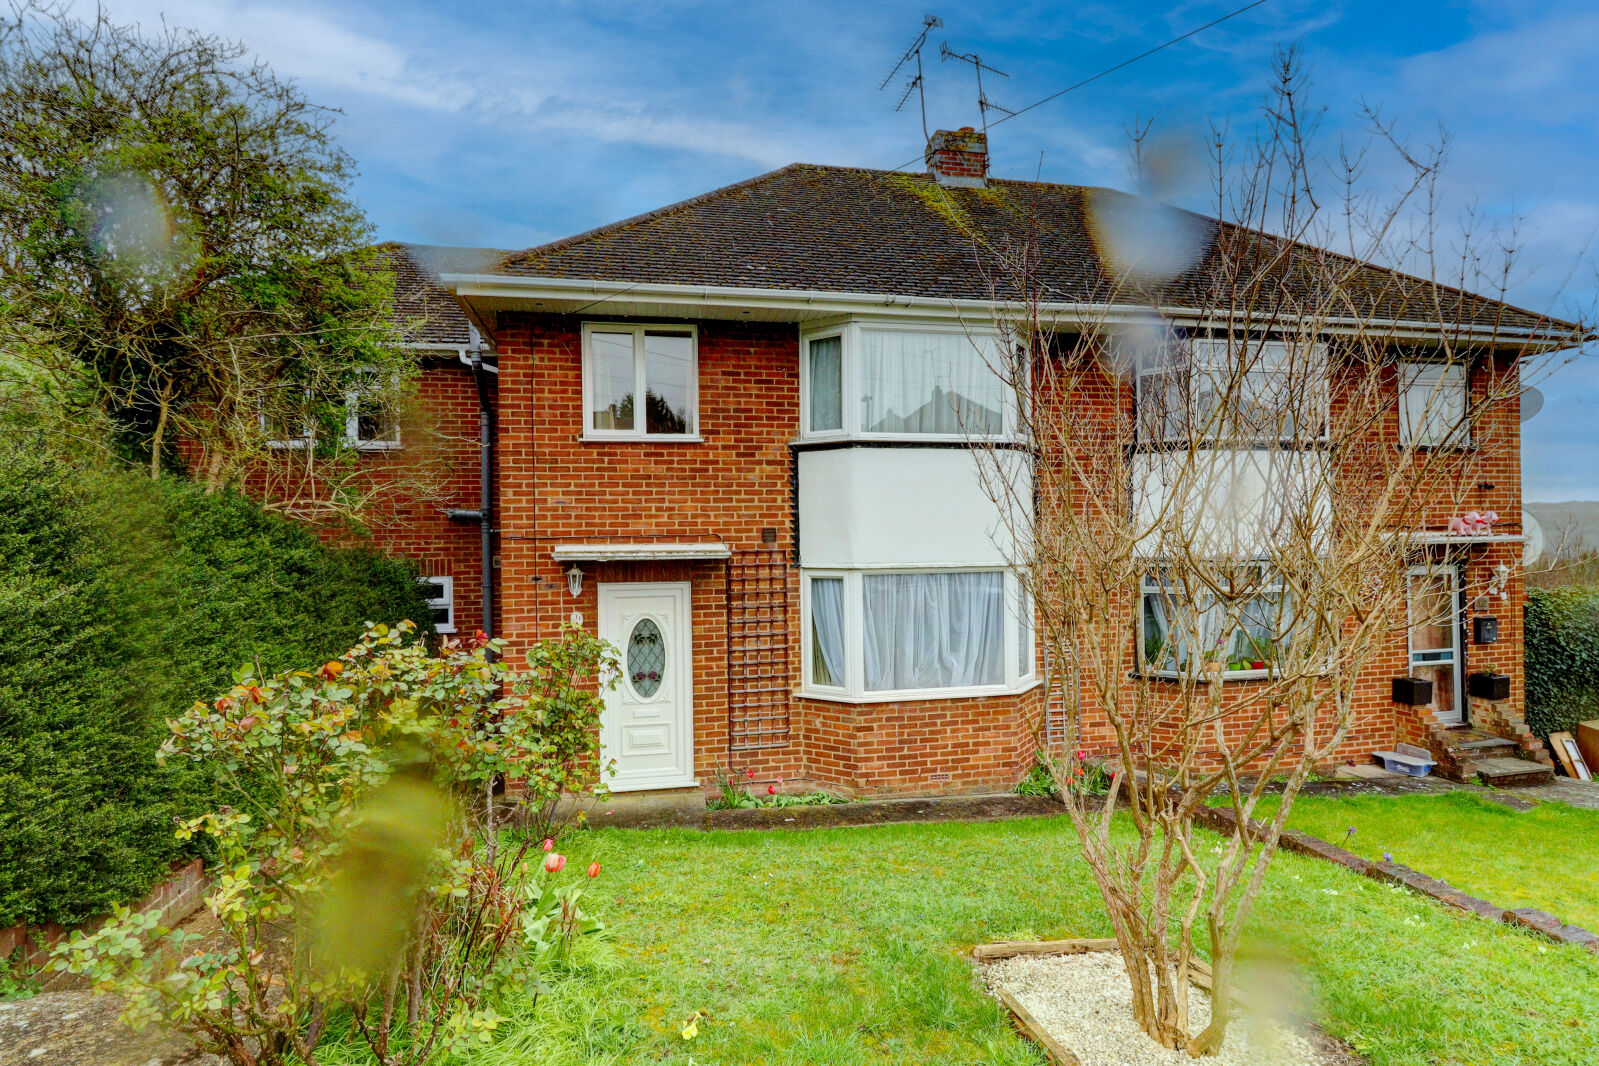 5 bedroom semi detached house for sale Burma Close, High Wycombe, HP13, main image